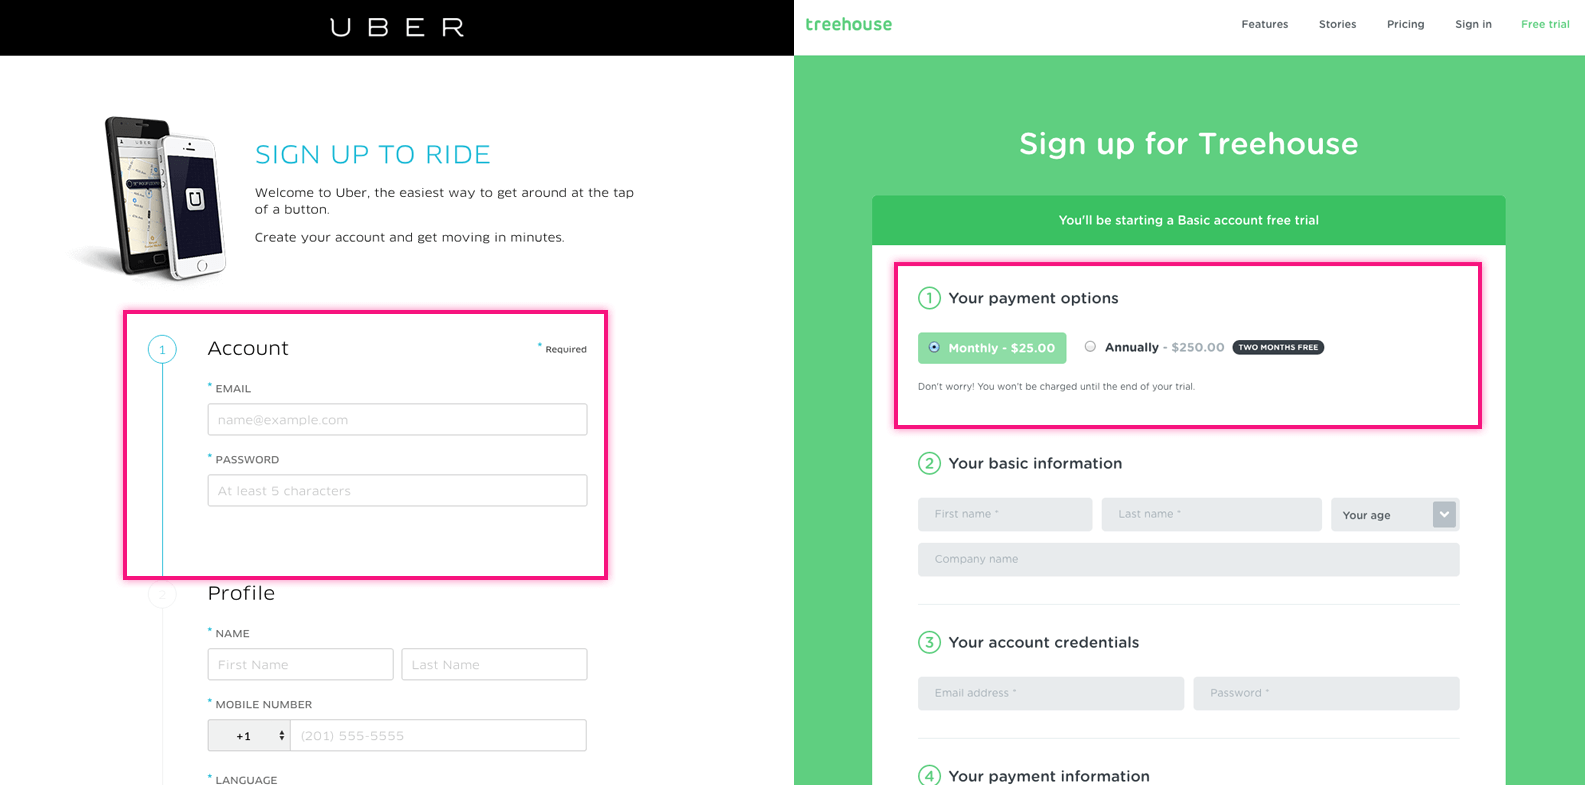 intuitive-sign-up-flows-guide-users